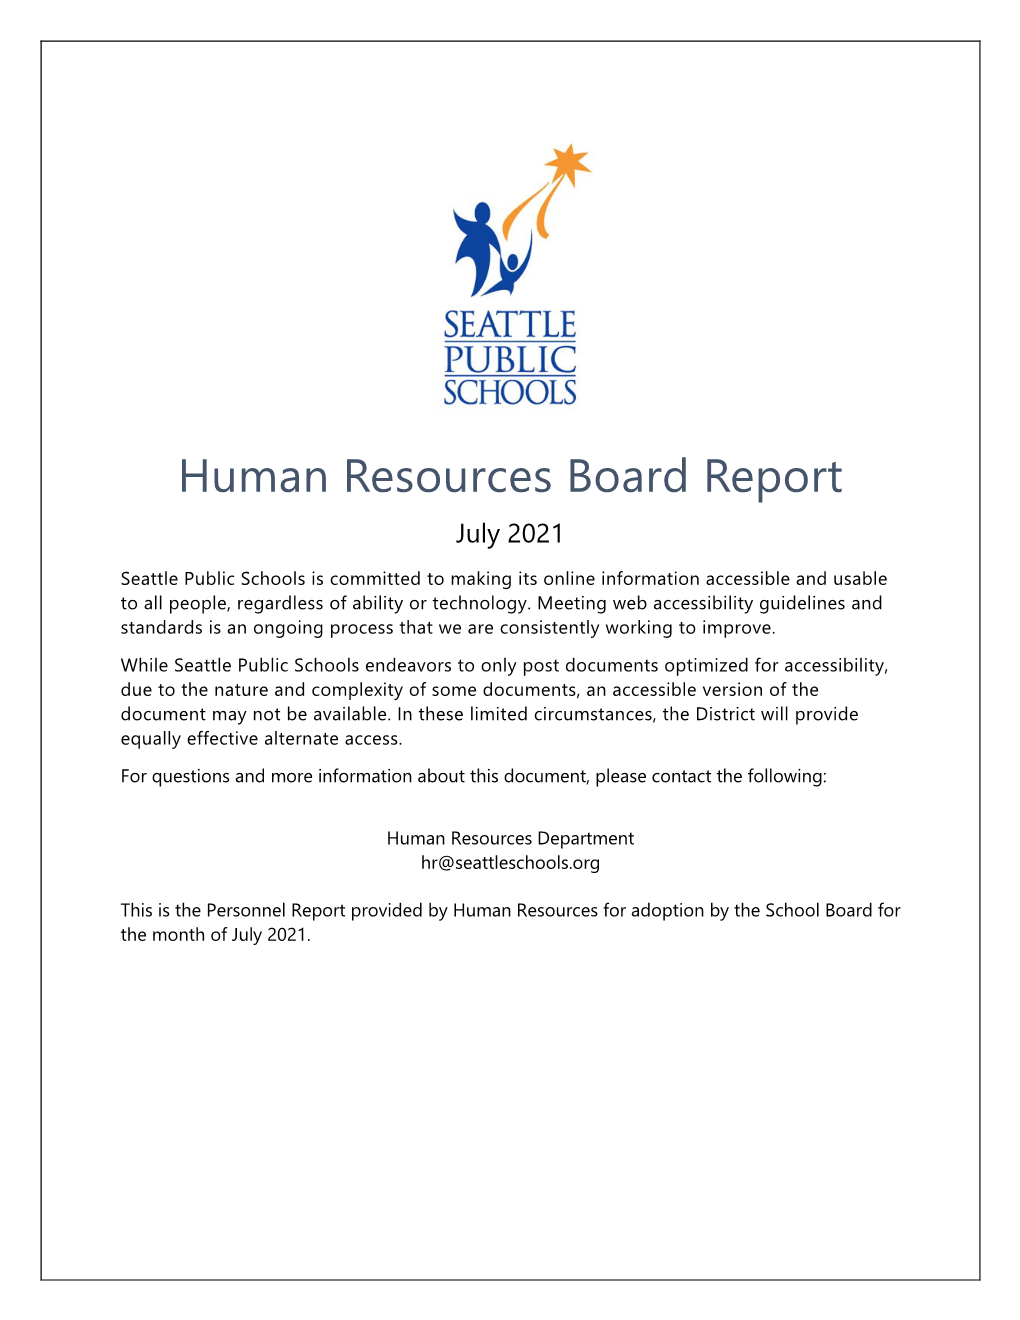 Human Resources Board Report July 2021